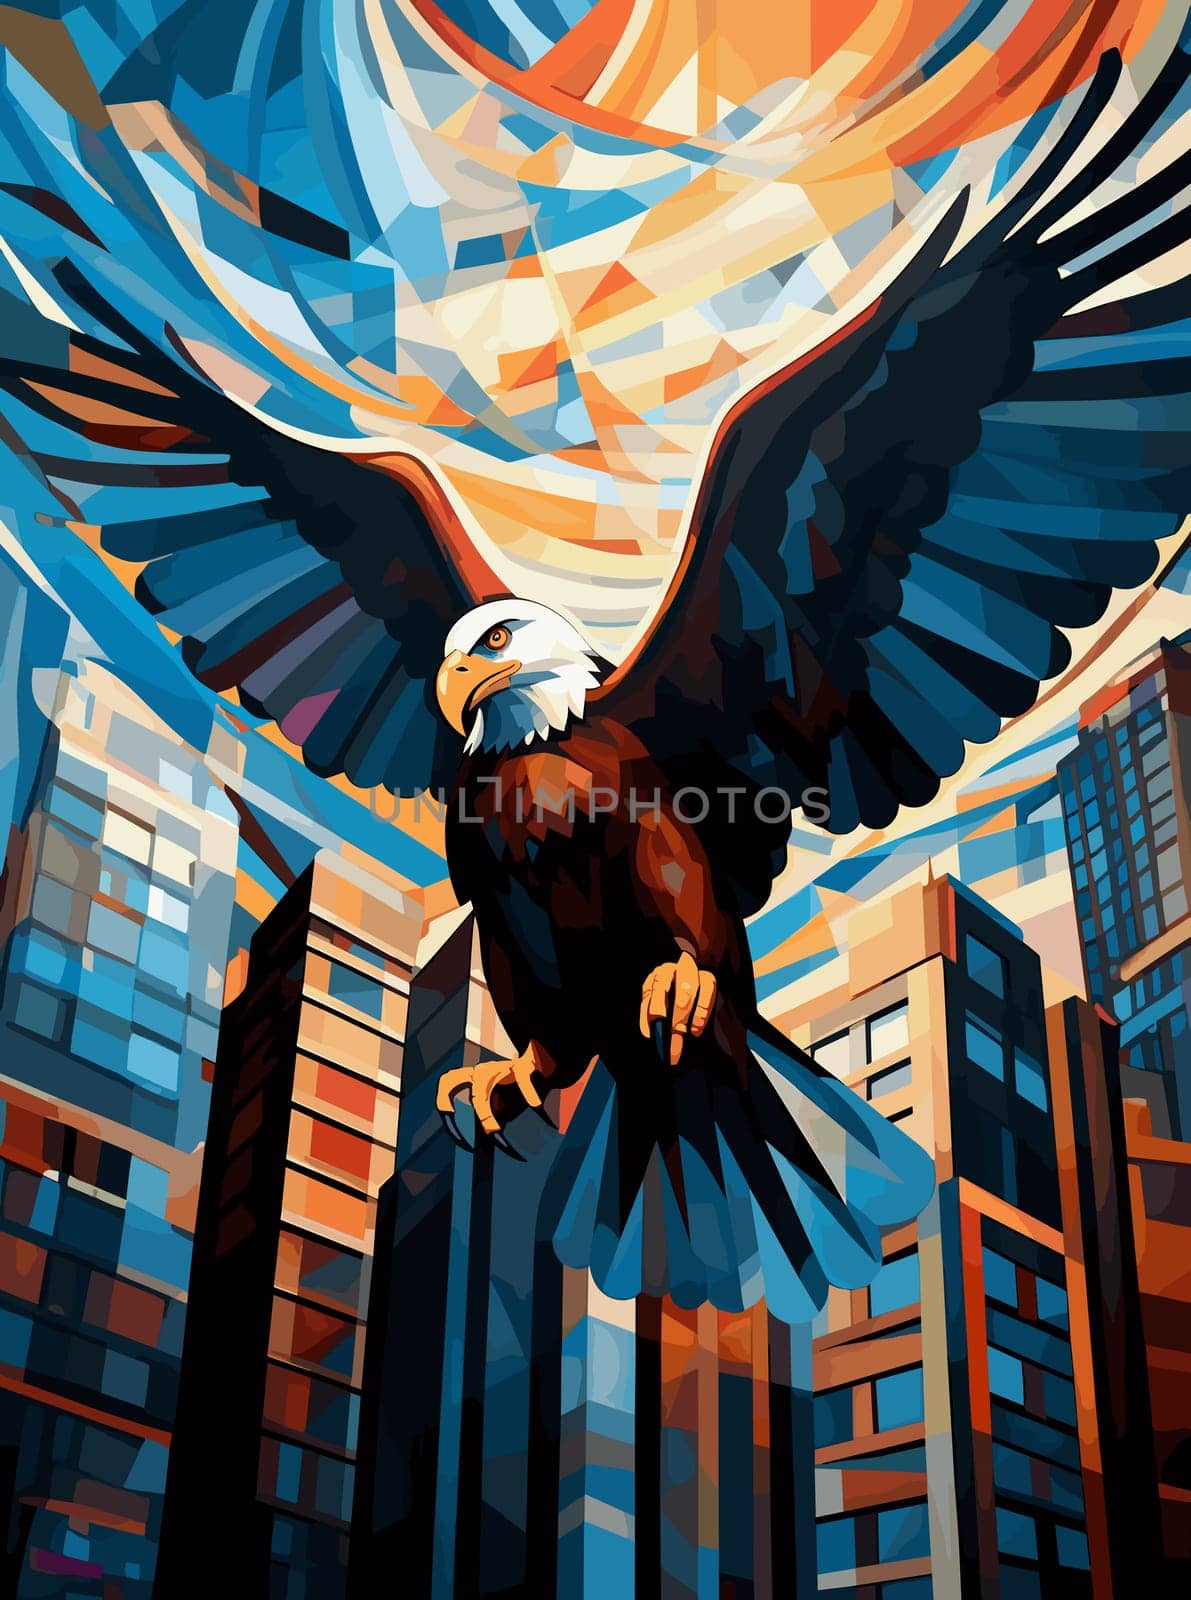 American bald eagle against the backdrop of a metropolis. Illustration in vector pop art style. Template for a poster, t-shirt print, sticker, etc.